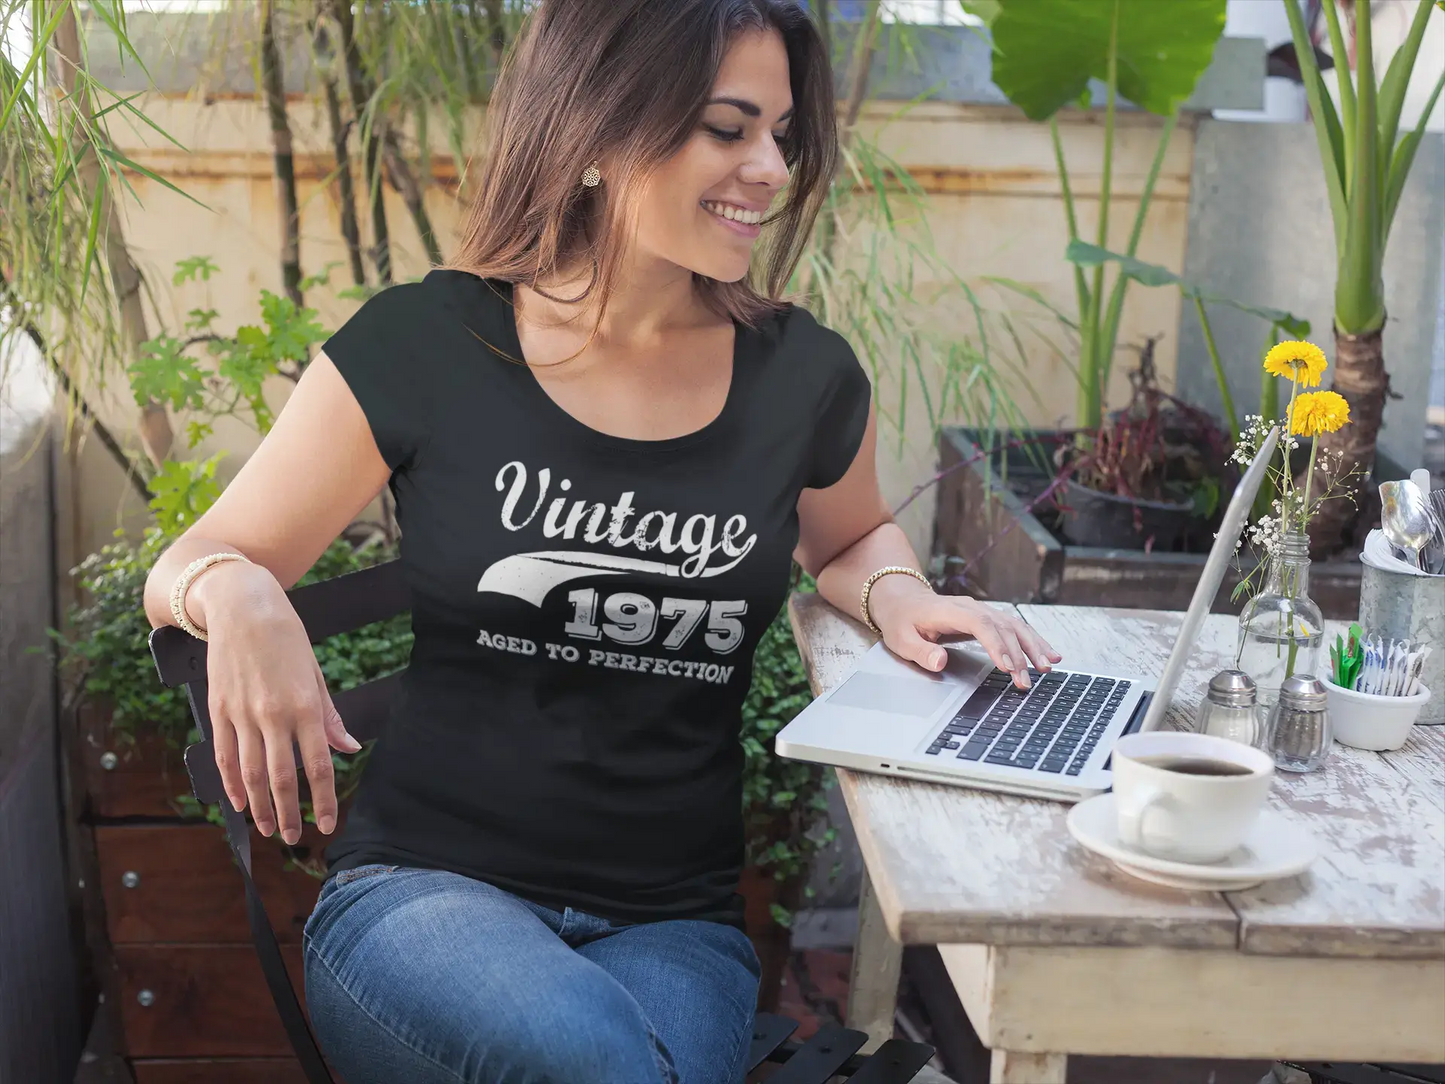 Vintage Aged to Perfection 1975, Black, Women's Short Sleeve Round Neck T-shirt, gift t-shirt 00345